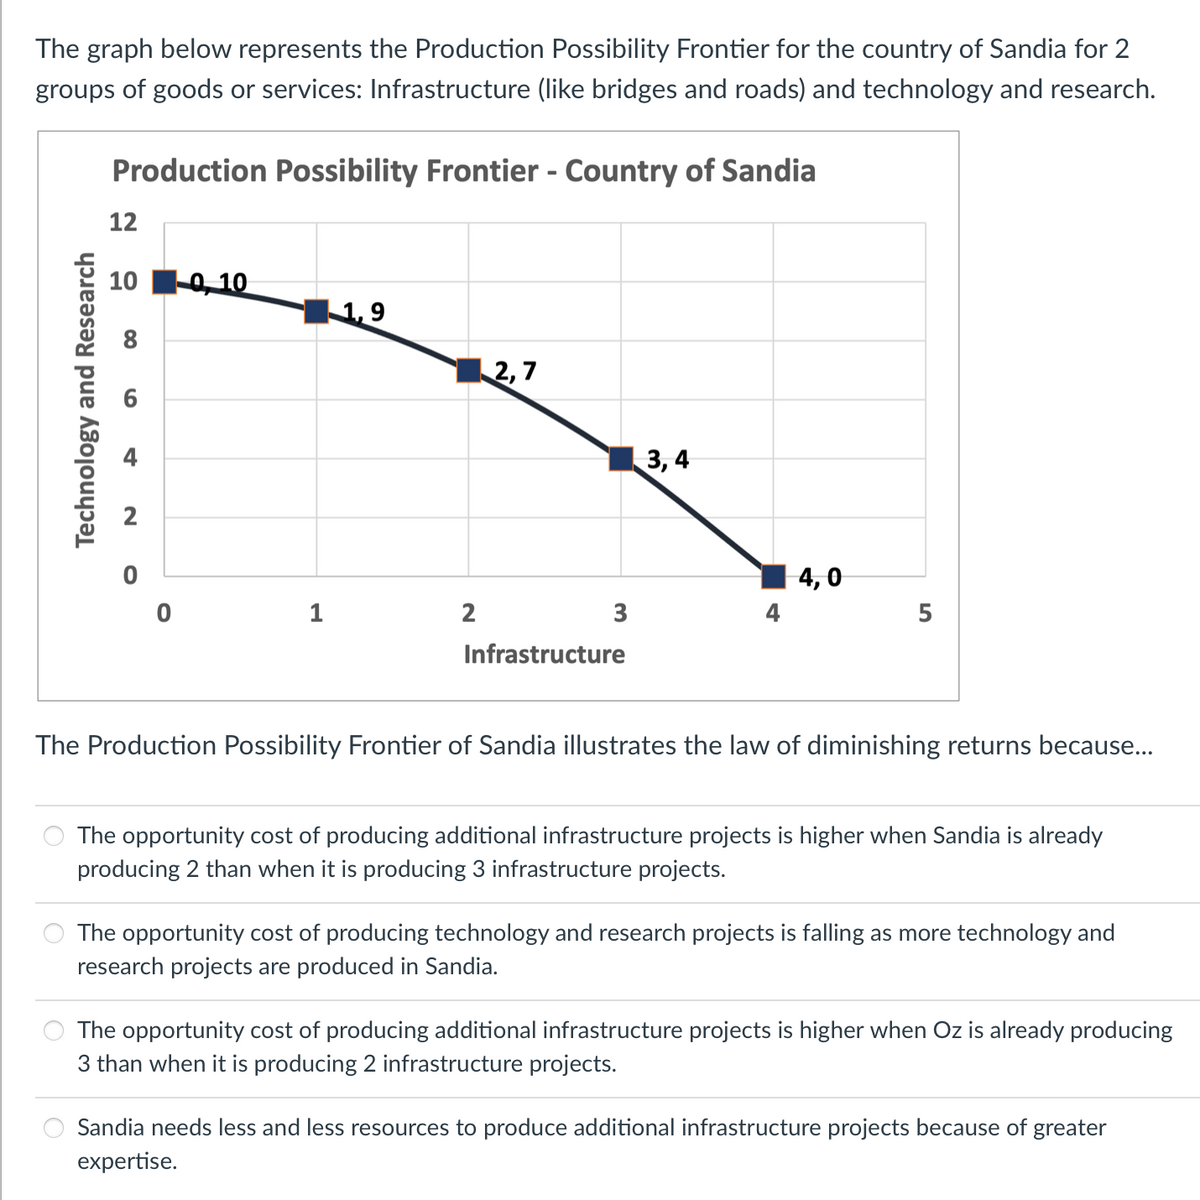 The graph below represents the Production Possibility Frontier for the country of Sandia for 2
groups of goods or services: Infrastructure (like bridges and roads) and technology and research.
Production Possibility Frontier - Country of Sandia
12
10
0, 10
1,9
2,7
3, 4
4,0
2
3
5
Infrastructure
The Production Possibility Frontier of Sandia illustrates the law of diminishing returns because...
The opportunity cost of producing additional infrastructure projects is higher when Sandia is already
producing 2 than when it is producing 3 infrastructure projects.
The opportunity cost of producing technology and research projects is falling as more technology and
research projects are produced in Sandia.
The opportunity cost of producing additional infrastructure projects is higher when Oz is already producing
3 than when it is producing 2 infrastructure projects.
Sandia needs less and less resources to produce additional infrastructure projects because of greater
expertise.
Technology and Research
